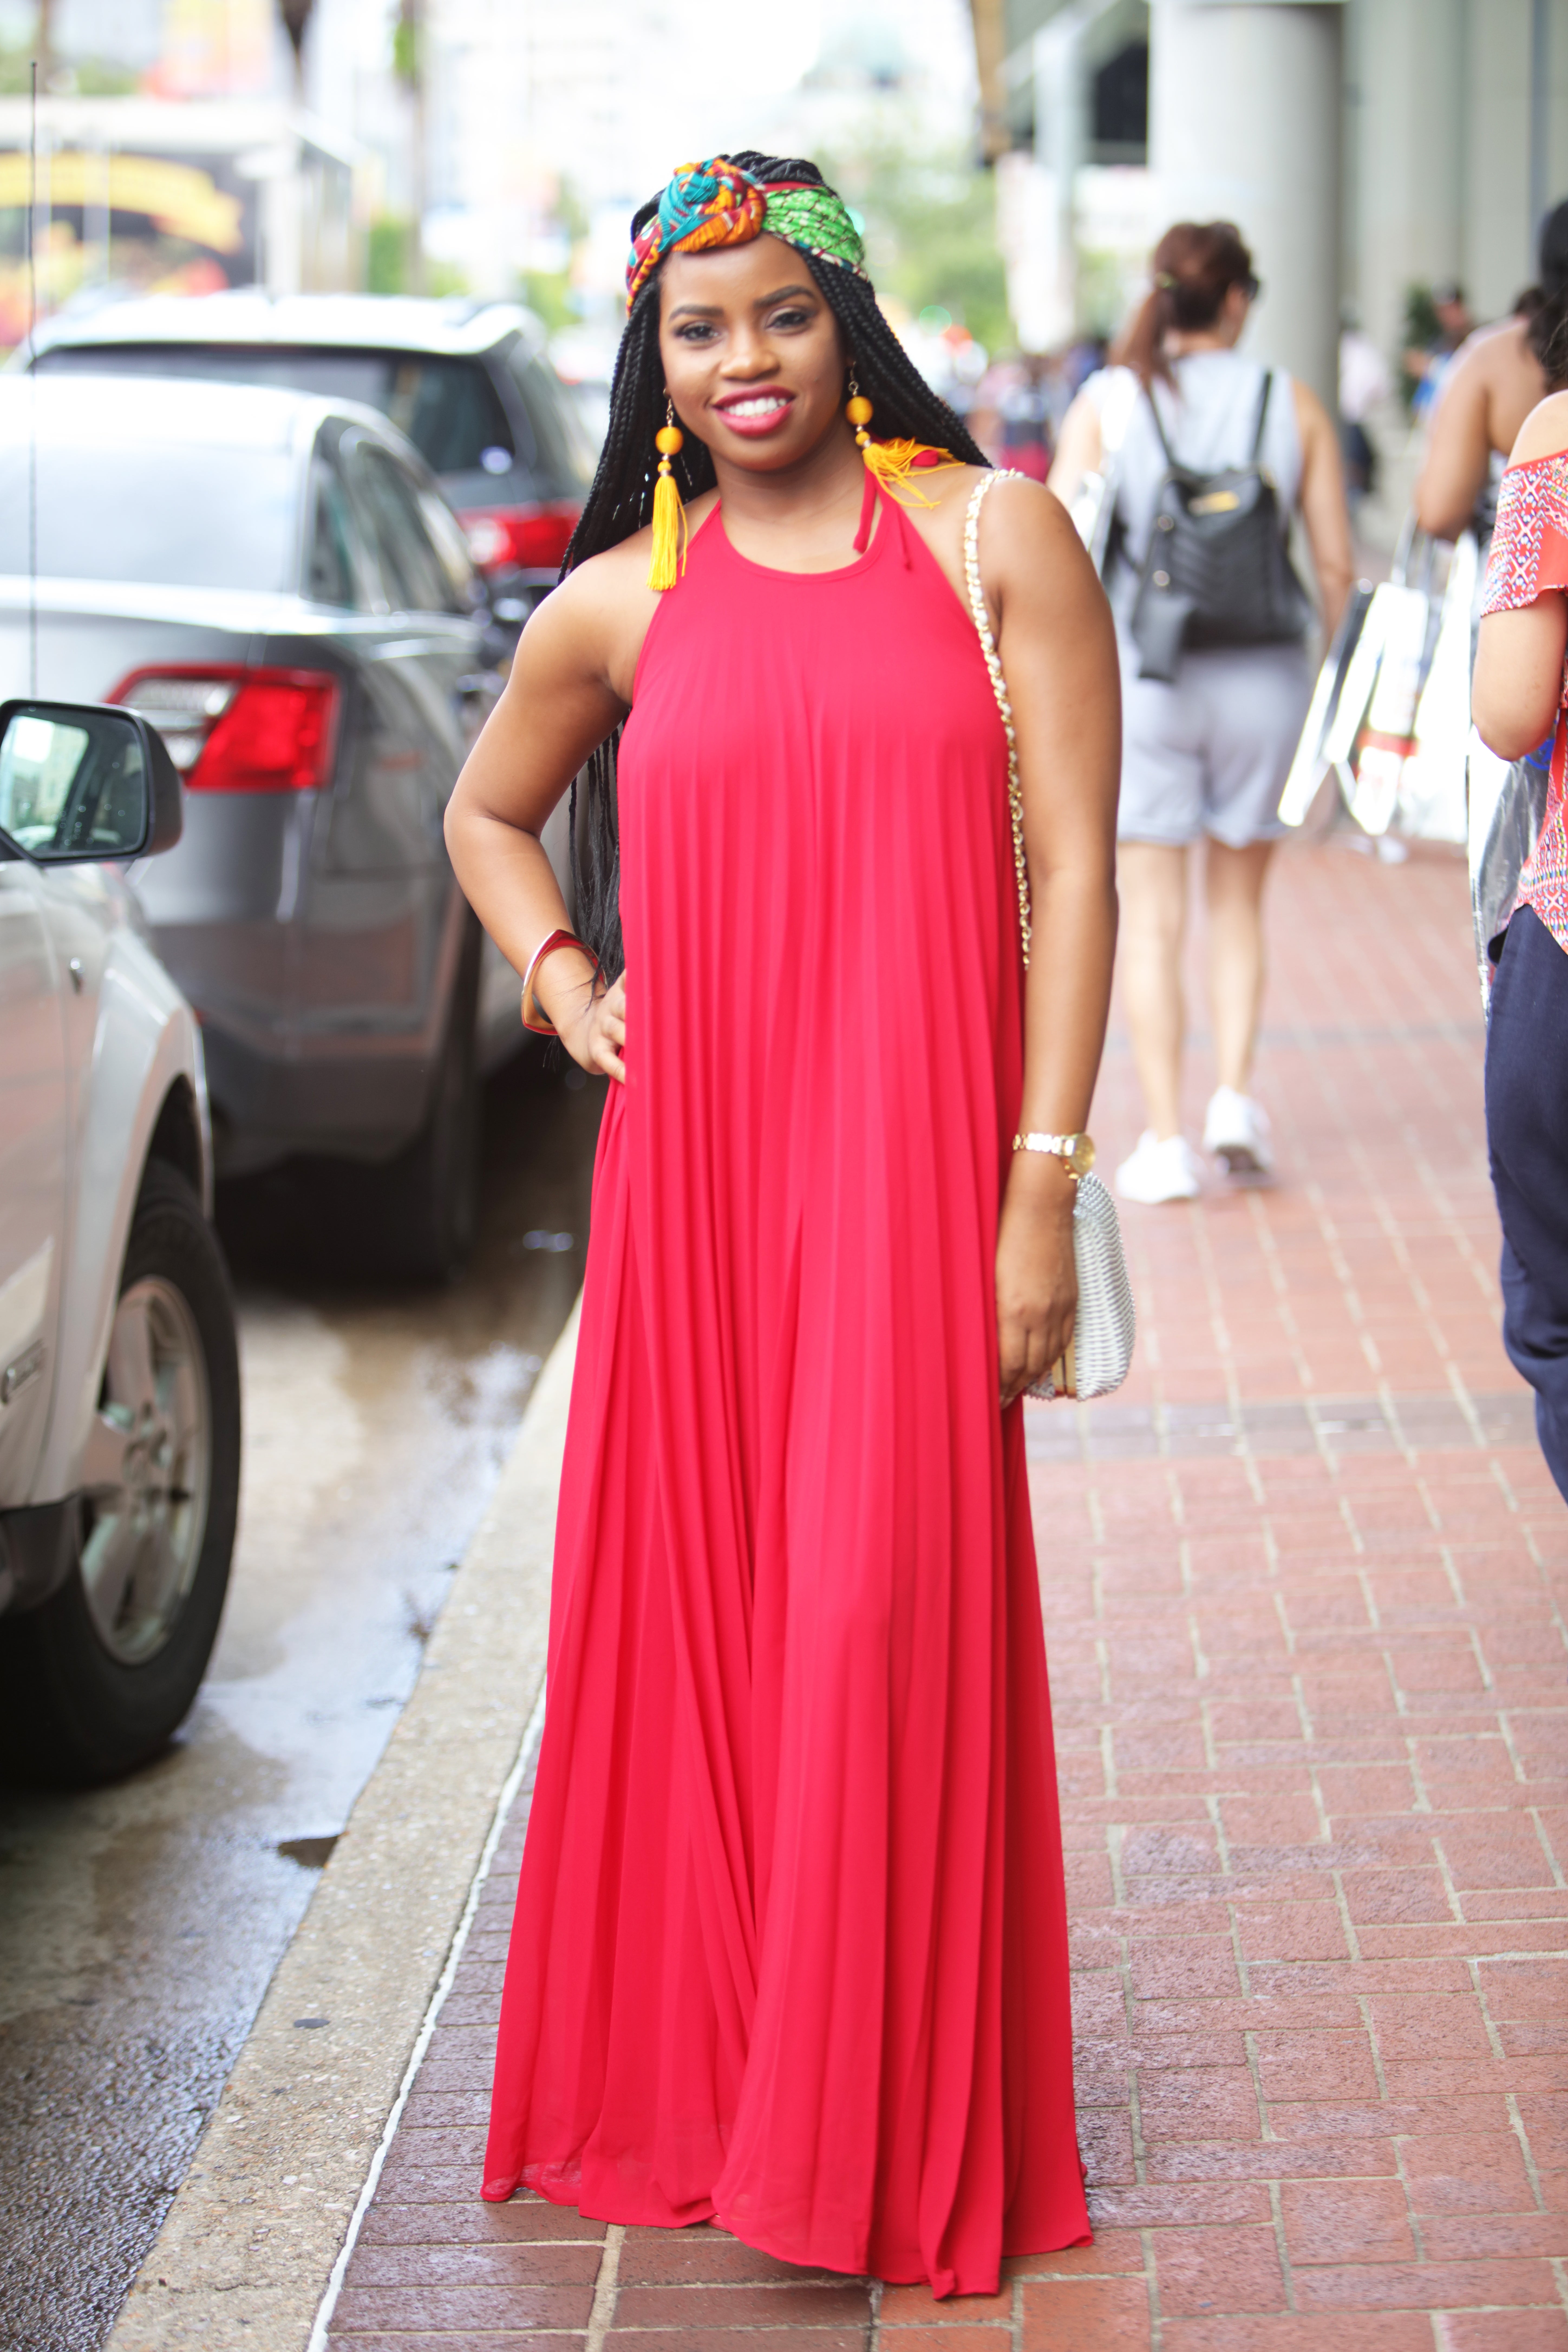 Behold, The Hottest Street Style Looks At ESSENCE Festival 2018
